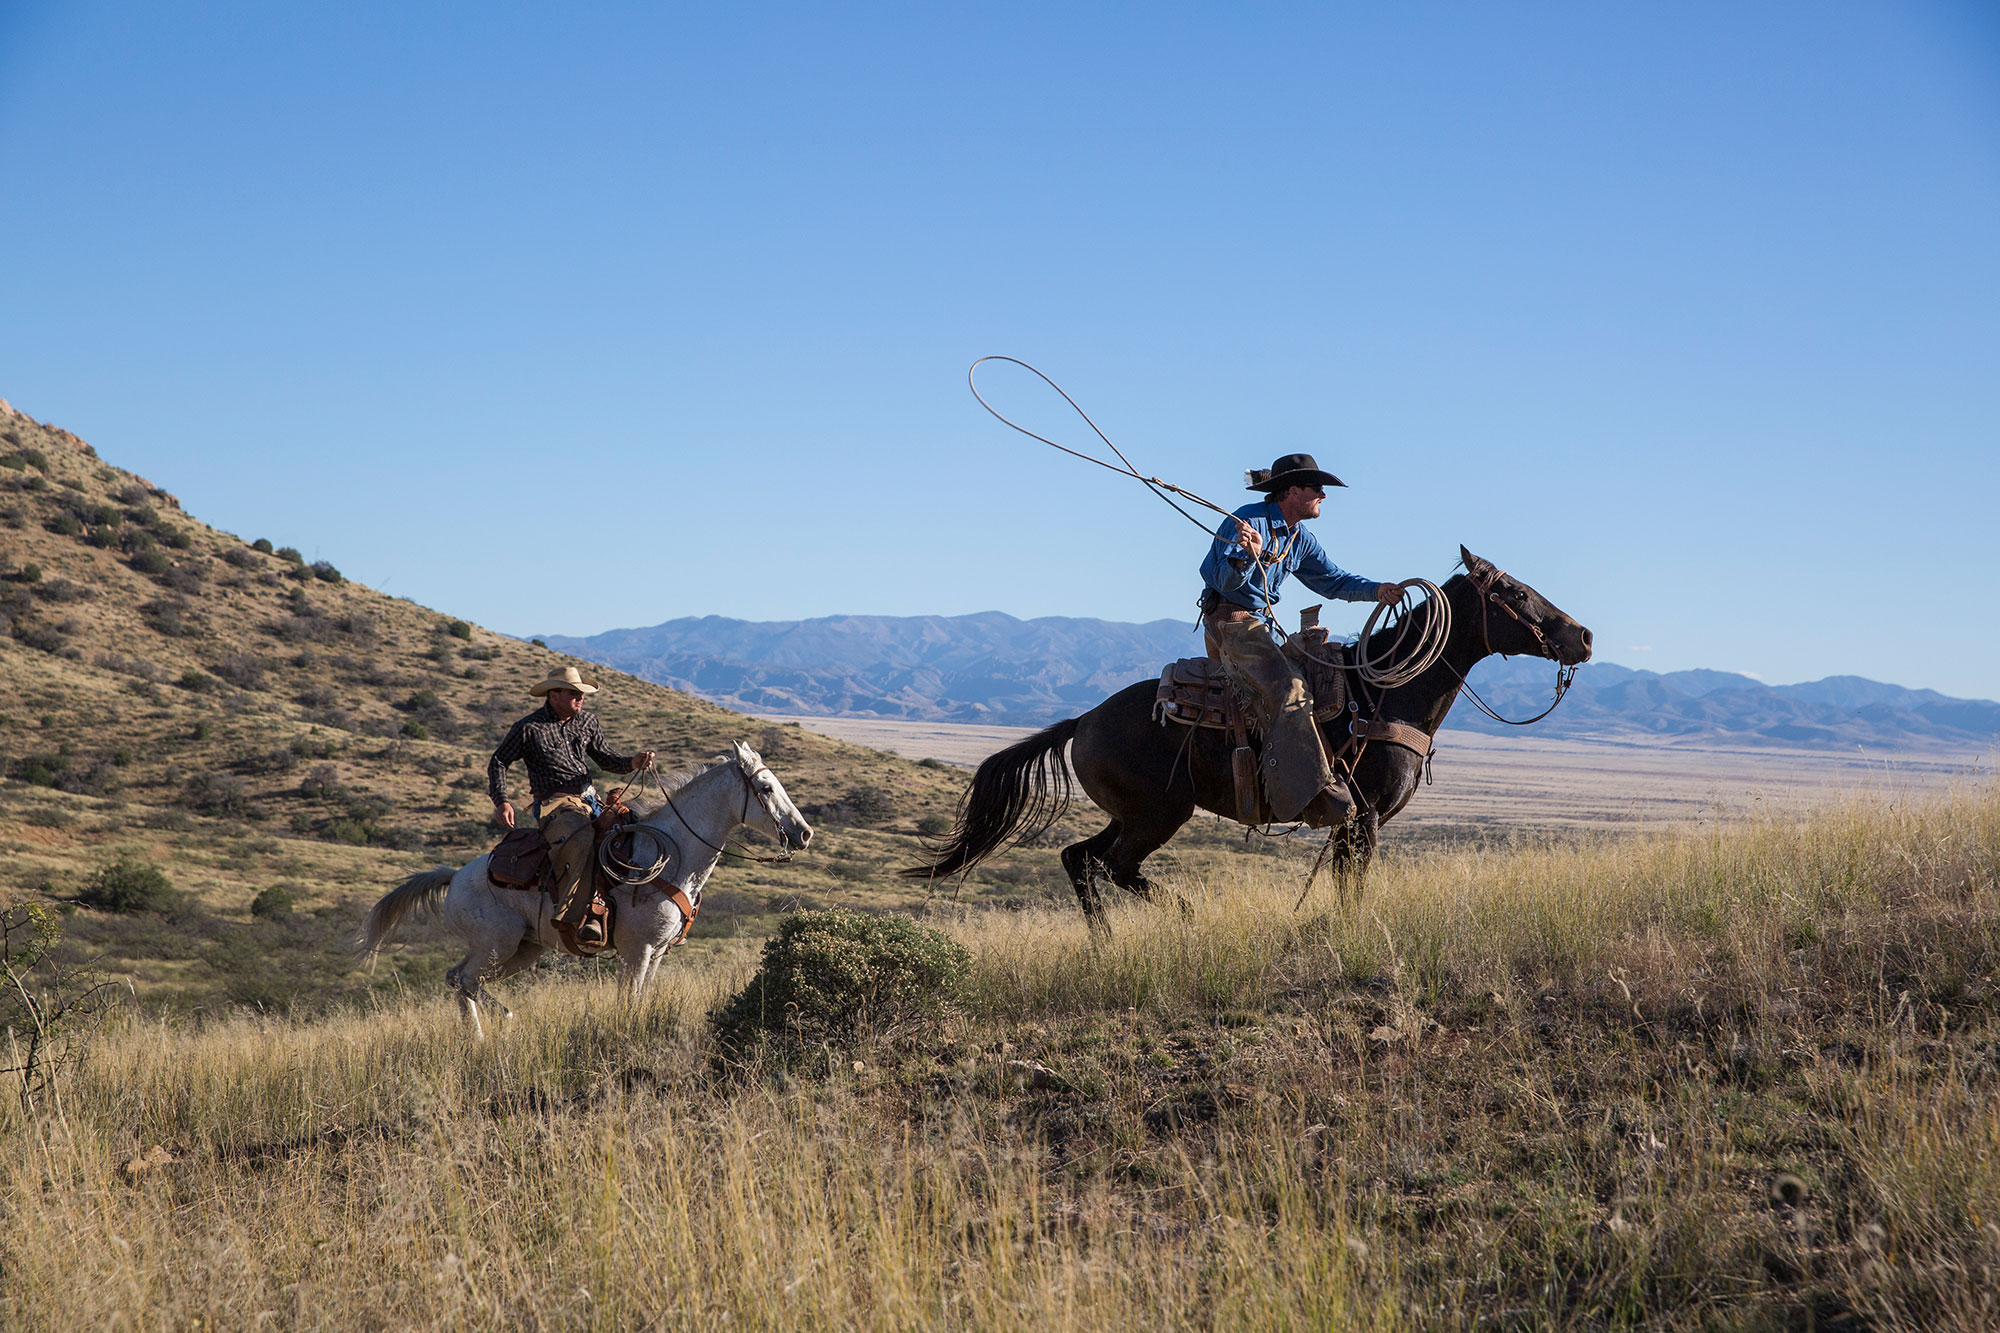 Two cowboys riding horses in a grassy field.